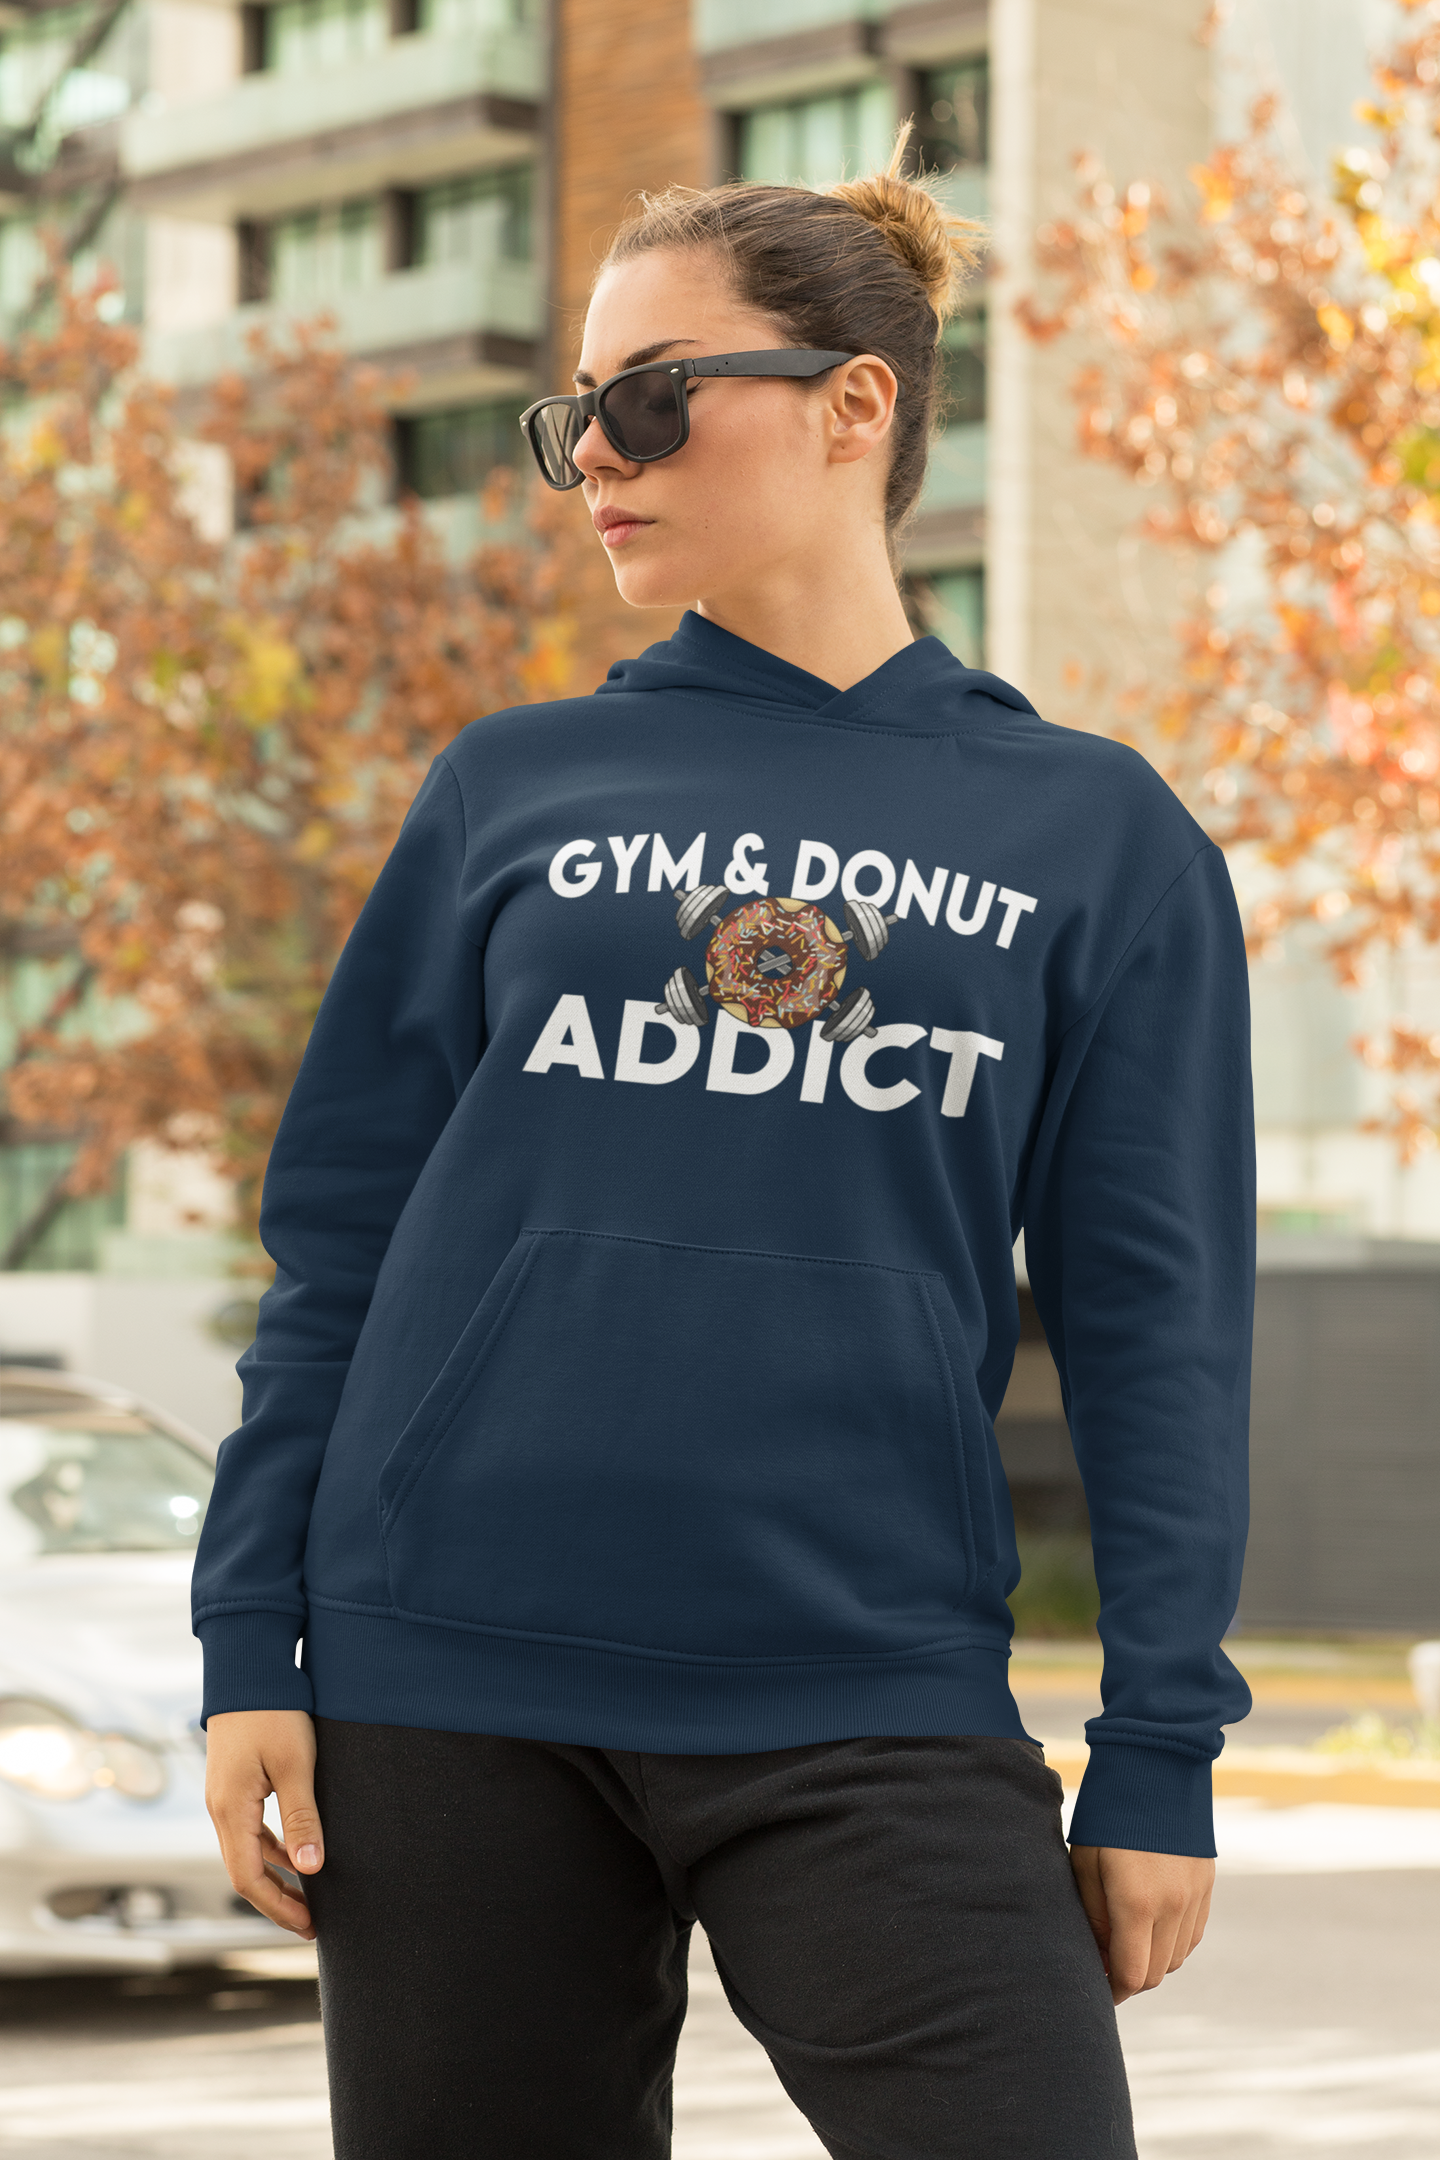 Gym and Donut Addict Unisex Hoodie with Quote on Back.